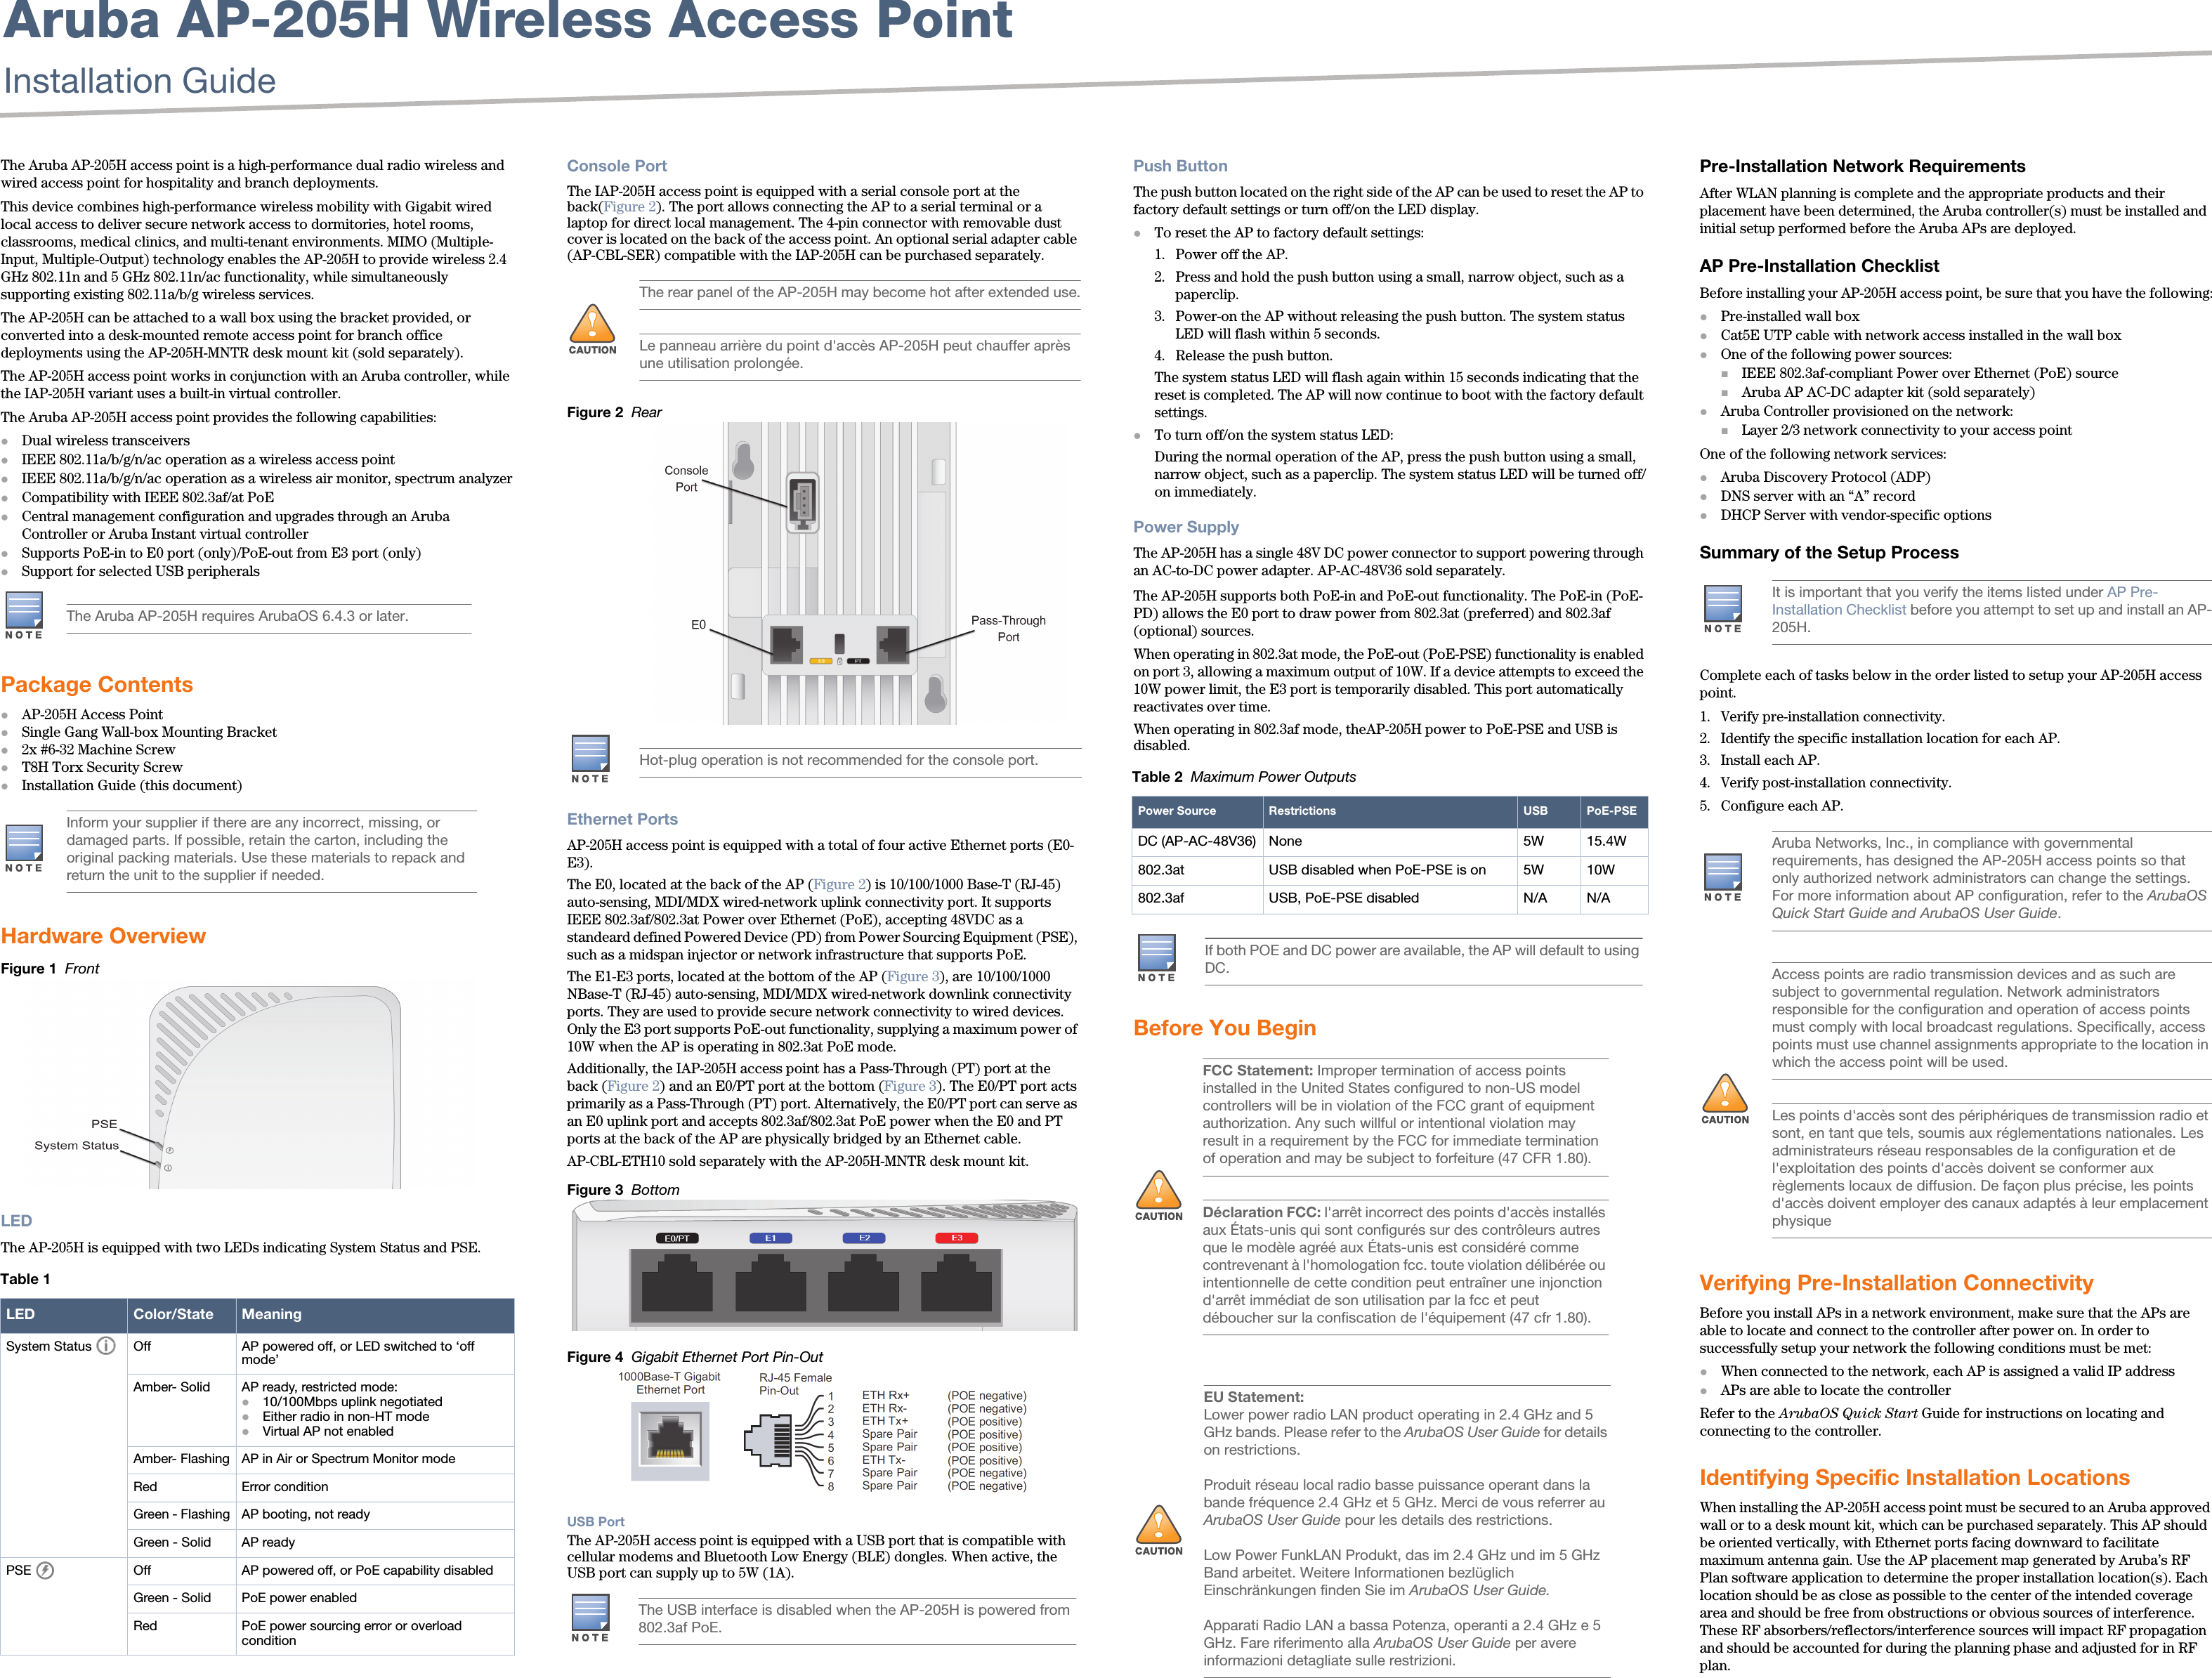 Aruba AP-205H Wireless Access PointInstallation Guide The Aruba AP-205H access point is a high-performance dual radio wireless and wired access point for hospitality and branch deployments. This device combines high-performance wireless mobility with Gigabit wired local access to deliver secure network access to dormitories, hotel rooms, classrooms, medical clinics, and multi-tenant environments. MIMO (Multiple-Input, Multiple-Output) technology enables the AP-205H to provide wireless 2.4 GHz 802.11n and 5 GHz 802.11n/ac functionality, while simultaneously supporting existing 802.11a/b/g wireless services.The AP-205H can be attached to a wall box using the bracket provided, or converted into a desk-mounted remote access point for branch office deployments using the AP-205H-MNTR desk mount kit (sold separately).The AP-205H access point works in conjunction with an Aruba controller, while the IAP-205H variant uses a built-in virtual controller.The Aruba AP-205H access point provides the following capabilities:Dual wireless transceiversIEEE 802.11a/b/g/n/ac operation as a wireless access pointIEEE 802.11a/b/g/n/ac operation as a wireless air monitor, spectrum analyzerCompatibility with IEEE 802.3af/at PoECentral management configuration and upgrades through an Aruba Controller or Aruba Instant virtual controllerSupports PoE-in to E0 port (only)/PoE-out from E3 port (only)Support for selected USB peripheralsPackage ContentsAP-205H Access PointSingle Gang Wall-box Mounting Bracket2x #6-32 Machine ScrewT8H Torx Security ScrewInstallation Guide (this document)Hardware OverviewFigure 1  FrontLEDThe AP-205H is equipped with two LEDs indicating System Status and PSE. Console PortThe IAP-205H access point is equipped with a serial console port at the back(Figure 2). The port allows connecting the AP to a serial terminal or a laptop for direct local management. The 4-pin connector with removable dust cover is located on the back of the access point. An optional serial adapter cable (AP-CBL-SER) compatible with the IAP-205H can be purchased separately.Figure 2  RearEthernet PortsAP-205H access point is equipped with a total of four active Ethernet ports (E0-E3). The E0, located at the back of the AP (Figure 2) is 10/100/1000 Base-T (RJ-45) auto-sensing, MDI/MDX wired-network uplink connectivity port. It supports IEEE 802.3af/802.3at Power over Ethernet (PoE), accepting 48VDC as a standeard defined Powered Device (PD) from Power Sourcing Equipment (PSE), such as a midspan injector or network infrastructure that supports PoE.The E1-E3 ports, located at the bottom of the AP (Figure 3), are 10/100/1000 NBase-T (RJ-45) auto-sensing, MDI/MDX wired-network downlink connectivity ports. They are used to provide secure network connectivity to wired devices. Only the E3 port supports PoE-out functionality, supplying a maximum power of 10W when the AP is operating in 802.3at PoE mode.Additionally, the IAP-205H access point has a Pass-Through (PT) port at the back (Figure 2) and an E0/PT port at the bottom (Figure 3). The E0/PT port acts primarily as a Pass-Through (PT) port. Alternatively, the E0/PT port can serve as an E0 uplink port and accepts 802.3af/802.3at PoE power when the E0 and PT ports at the back of the AP are physically bridged by an Ethernet cable. AP-CBL-ETH10 sold separately with the AP-205H-MNTR desk mount kit.Figure 3  Bottom Figure 4  Gigabit Ethernet Port Pin-OutUSB PortThe AP-205H access point is equipped with a USB port that is compatible with cellular modems and Bluetooth Low Energy (BLE) dongles. When active, the USB port can supply up to 5W (1A).Push ButtonThe push button located on the right side of the AP can be used to reset the AP to factory default settings or turn off/on the LED display. To reset the AP to factory default settings:1. Power off the AP.2. Press and hold the push button using a small, narrow object, such as a paperclip.3. Power-on the AP without releasing the push button. The system status LED will flash within 5 seconds.4. Release the push button.The system status LED will flash again within 15 seconds indicating that the reset is completed. The AP will now continue to boot with the factory default settings.To turn off/on the system status LED:During the normal operation of the AP, press the push button using a small, narrow object, such as a paperclip. The system status LED will be turned off/on immediately.Power SupplyThe AP-205H has a single 48V DC power connector to support powering through an AC-to-DC power adapter. AP-AC-48V36 sold separately.The AP-205H supports both PoE-in and PoE-out functionality. The PoE-in (PoE-PD) allows the E0 port to draw power from 802.3at (preferred) and 802.3af (optional) sources.When operating in 802.3at mode, the PoE-out (PoE-PSE) functionality is enabled on port 3, allowing a maximum output of 10W. If a device attempts to exceed the 10W power limit, the E3 port is temporarily disabled. This port automatically reactivates over time.When operating in 802.3af mode, theAP-205H power to PoE-PSE and USB is disabled. Before You BeginPre-Installation Network RequirementsAfter WLAN planning is complete and the appropriate products and their placement have been determined, the Aruba controller(s) must be installed and initial setup performed before the Aruba APs are deployed.AP Pre-Installation ChecklistBefore installing your AP-205H access point, be sure that you have the following:Pre-installed wall boxCat5E UTP cable with network access installed in the wall boxOne of the following power sources:IEEE 802.3af-compliant Power over Ethernet (PoE) sourceAruba AP AC-DC adapter kit (sold separately)Aruba Controller provisioned on the network:Layer 2/3 network connectivity to your access pointOne of the following network services:Aruba Discovery Protocol (ADP)DNS server with an “A” recordDHCP Server with vendor-specific optionsSummary of the Setup ProcessComplete each of tasks below in the order listed to setup your AP-205H access point.1. Verify pre-installation connectivity.2. Identify the specific installation location for each AP.3. Install each AP.4. Verify post-installation connectivity.5. Configure each AP.Verifying Pre-Installation ConnectivityBefore you install APs in a network environment, make sure that the APs are able to locate and connect to the controller after power on. In order to successfully setup your network the following conditions must be met:When connected to the network, each AP is assigned a valid IP addressAPs are able to locate the controller Refer to the ArubaOS Quick Start Guide for instructions on locating and connecting to the controller.Identifying Specific Installation LocationsWhen installing the AP-205H access point must be secured to an Aruba approved wall or to a desk mount kit, which can be purchased separately. This AP should be oriented vertically, with Ethernet ports facing downward to facilitate maximum antenna gain. Use the AP placement map generated by Aruba’s RF Plan software application to determine the proper installation location(s). Each location should be as close as possible to the center of the intended coverage area and should be free from obstructions or obvious sources of interference. These RF absorbers/reflectors/interference sources will impact RF propagation and should be accounted for during the planning phase and adjusted for in RF plan.The Aruba AP-205H requires ArubaOS 6.4.3 or later.Inform your supplier if there are any incorrect, missing, or damaged parts. If possible, retain the carton, including the original packing materials. Use these materials to repack and return the unit to the supplier if needed.Table 1  LED Color/State MeaningSystem Status Off AP powered off, or LED switched to ‘off mode’Amber- Solid AP ready, restricted mode:10/100Mbps uplink negotiatedEither radio in non-HT modeVirtual AP not enabledAmber- Flashing AP in Air or Spectrum Monitor modeRed Error conditionGreen - Flashing AP booting, not readyGreen - Solid AP readyPSE Off AP powered off, or PoE capability disabledGreen - Solid PoE power enabledRed PoE power sourcing error or overload condition!The rear panel of the AP-205H may become hot after extended use.Le panneau arrière du point d&apos;accès AP-205H peut chauffer après une utilisation prolongée.Hot-plug operation is not recommended for the console port.The USB interface is disabled when the AP-205H is powered from 802.3af PoE.Table 2  Maximum Power OutputsPower Source Restrictions USB PoE-PSEDC (AP-AC-48V36) None 5W 15.4W802.3at USB disabled when PoE-PSE is on 5W 10W802.3af USB, PoE-PSE disabled  N/A N/AIf both POE and DC power are available, the AP will default to using DC.!FCC Statement: Improper termination of access points installed in the United States configured to non-US model controllers will be in violation of the FCC grant of equipment authorization. Any such willful or intentional violation may result in a requirement by the FCC for immediate termination of operation and may be subject to forfeiture (47 CFR 1.80).Déclaration FCC: l&apos;arrêt incorrect des points d&apos;accès installés aux États-unis qui sont configurés sur des contrôleurs autres que le modèle agréé aux États-unis est considéré comme contrevenant à l&apos;homologation fcc. toute violation délibérée ou intentionnelle de cette condition peut entraîner une injonction d&apos;arrêt immédiat de son utilisation par la fcc et peut déboucher sur la confiscation de l&apos;équipement (47 cfr 1.80).!EU Statement: Lower power radio LAN product operating in 2.4 GHz and 5 GHz bands. Please refer to the ArubaOS User Guide for details on restrictions.Produit réseau local radio basse puissance operant dans la bande fréquence 2.4 GHz et 5 GHz. Merci de vous referrer au ArubaOS User Guide pour les details des restrictions.Low Power FunkLAN Produkt, das im 2.4 GHz und im 5 GHz Band arbeitet. Weitere Informationen bezlüglich Einschränkungen finden Sie im ArubaOS User Guide.Apparati Radio LAN a bassa Potenza, operanti a 2.4 GHz e 5 GHz. Fare riferimento alla ArubaOS User Guide per avere informazioni detagliate sulle restrizioni.It is important that you verify the items listed under AP Pre-Installation Checklist before you attempt to set up and install an AP-205H.Aruba Networks, Inc., in compliance with governmental requirements, has designed the AP-205H access points so that only authorized network administrators can change the settings. For more information about AP configuration, refer to the ArubaOS Quick Start Guide and ArubaOS User Guide.!Access points are radio transmission devices and as such are subject to governmental regulation. Network administrators responsible for the configuration and operation of access points must comply with local broadcast regulations. Specifically, access points must use channel assignments appropriate to the location in which the access point will be used.Les points d&apos;accès sont des périphériques de transmission radio et sont, en tant que tels, soumis aux réglementations nationales. Les administrateurs réseau responsables de la configuration et de l&apos;exploitation des points d&apos;accès doivent se conformer aux règlements locaux de diffusion. De façon plus précise, les points d&apos;accès doivent employer des canaux adaptés à leur emplacement physique